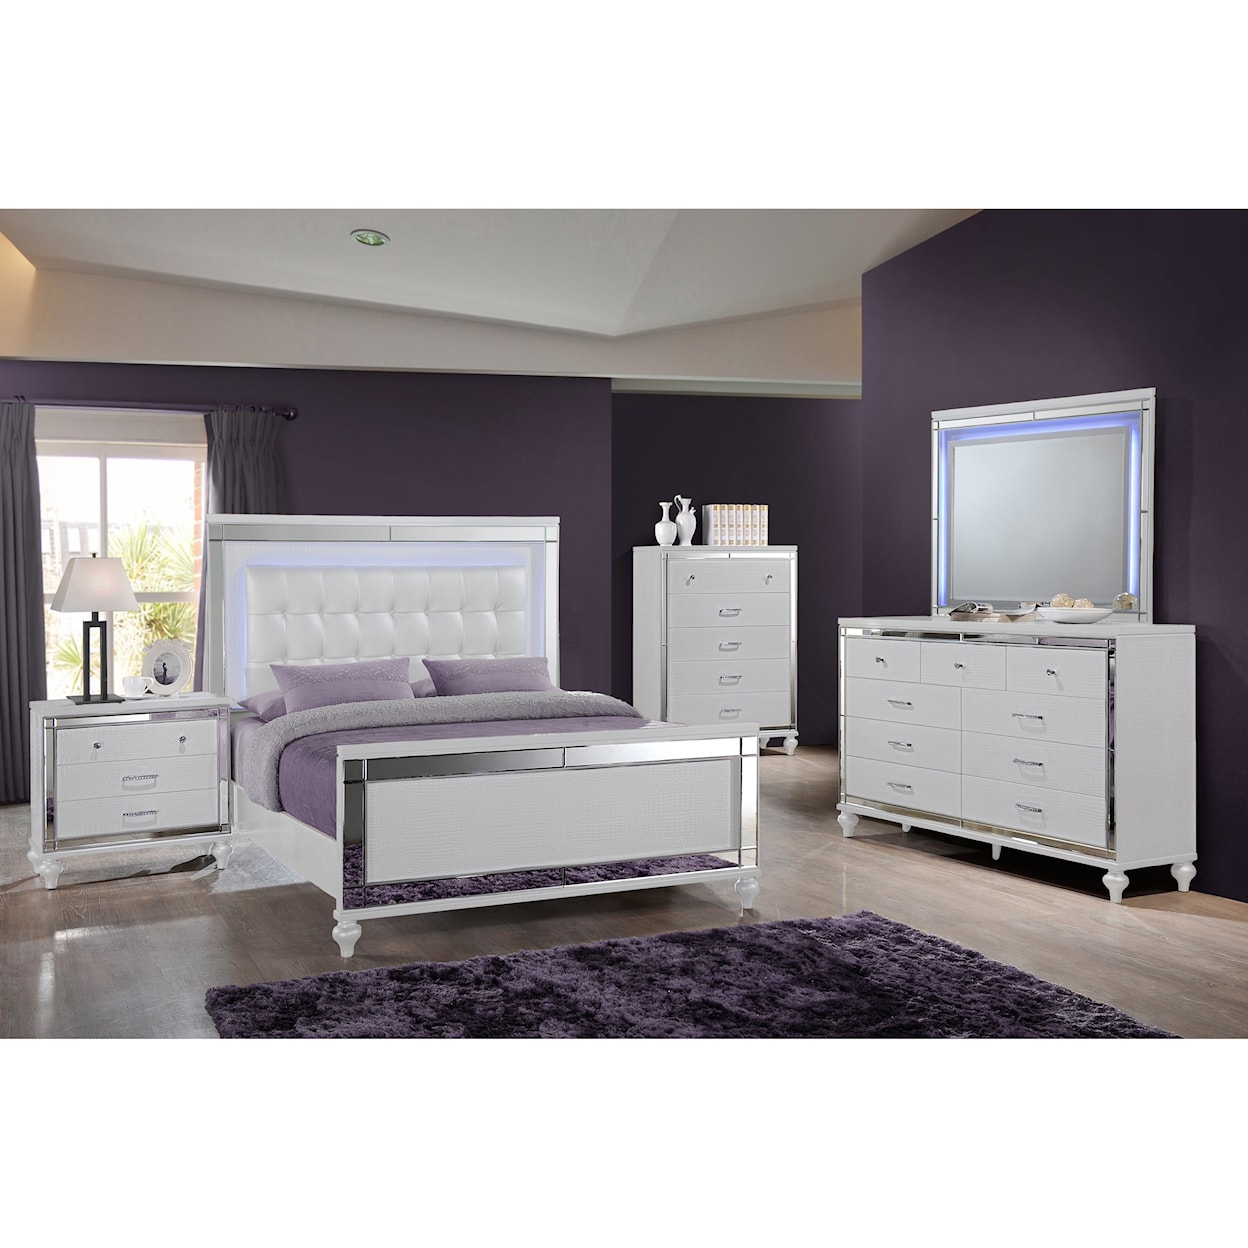 New Classic Furniture Valerie California King Bedroom Group